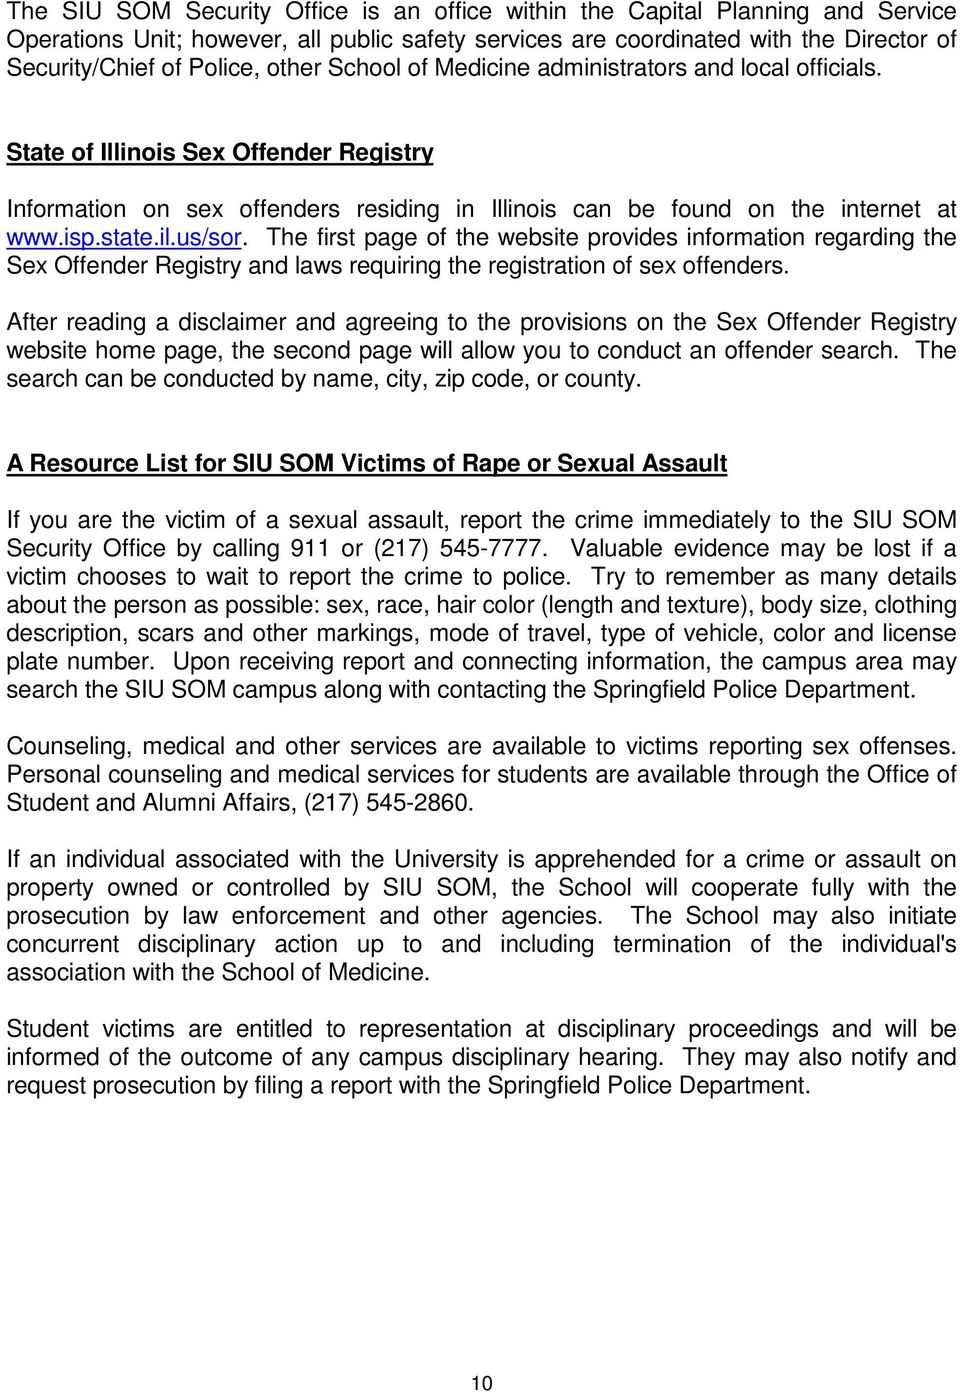 us/sor. The first page of the website provides information regarding the Sex Offender Registry and laws requiring the registration of sex offenders.